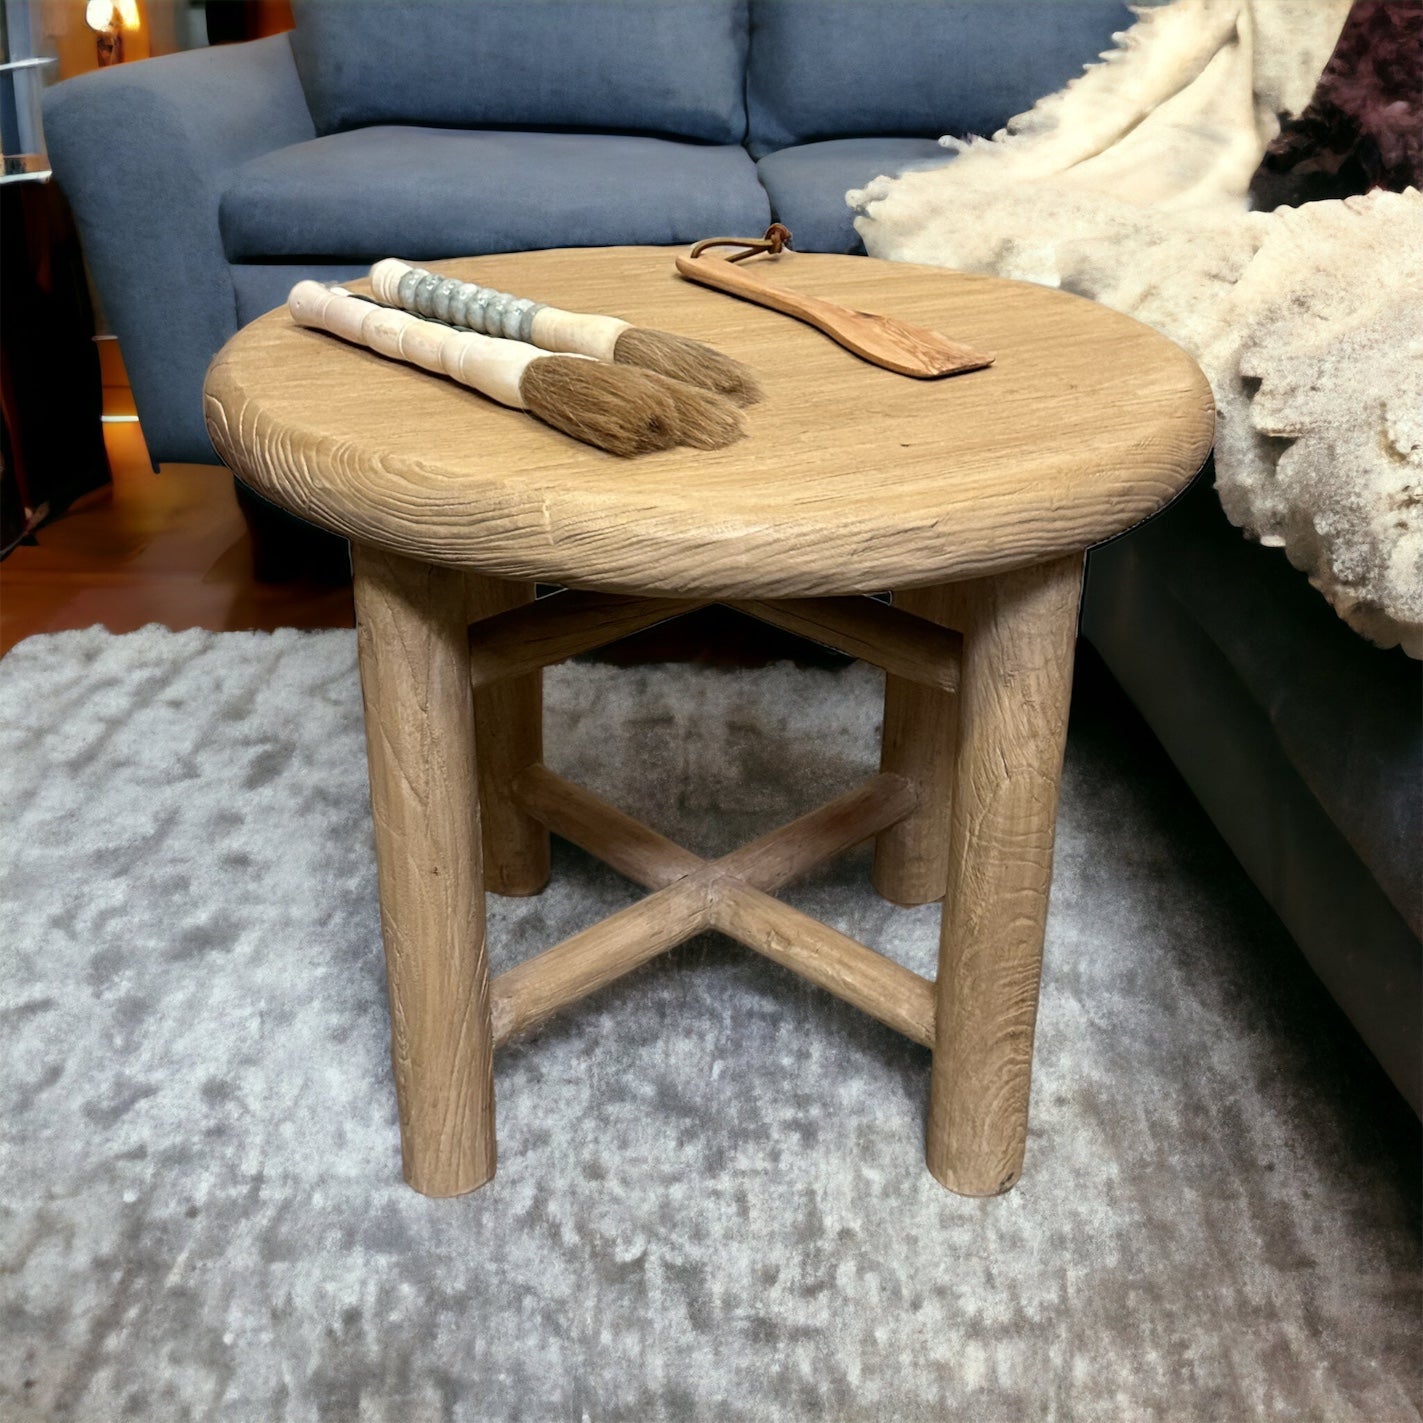 Handmade Natural Round Table Multiple sizes